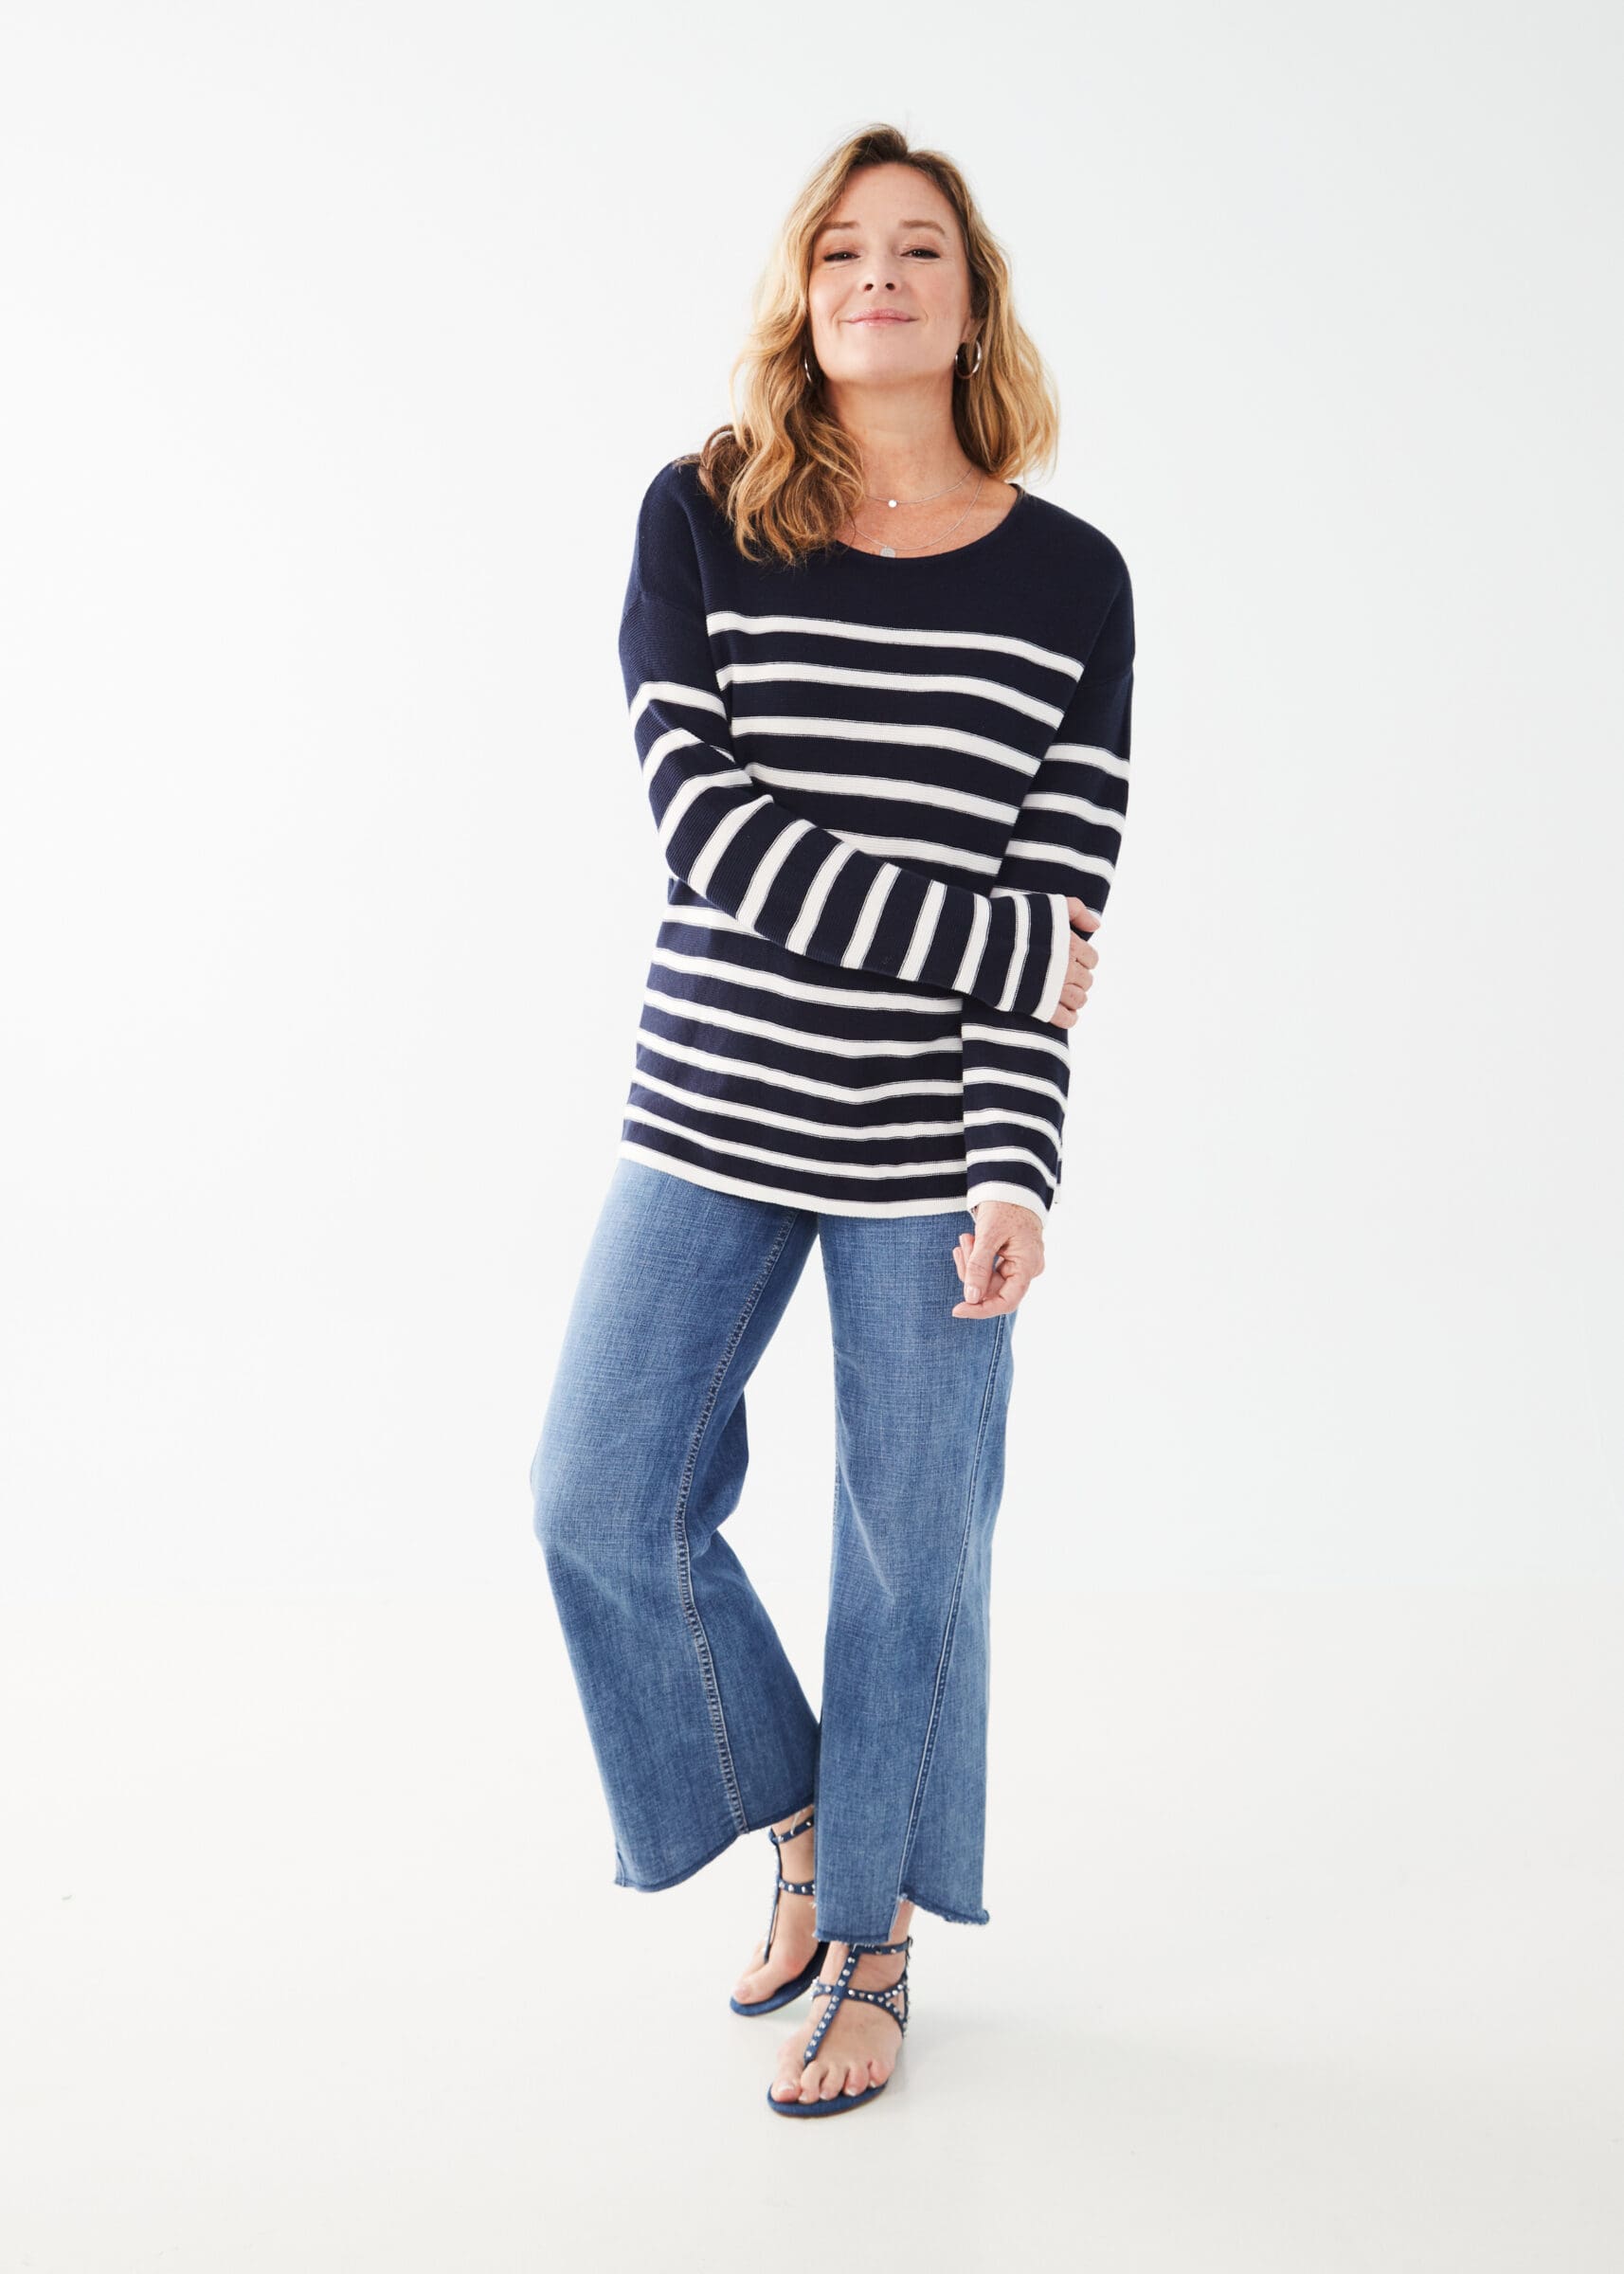 [:en]Long Sleeve Striped Sweater[:fr]Pull rayé à manches longues[:]